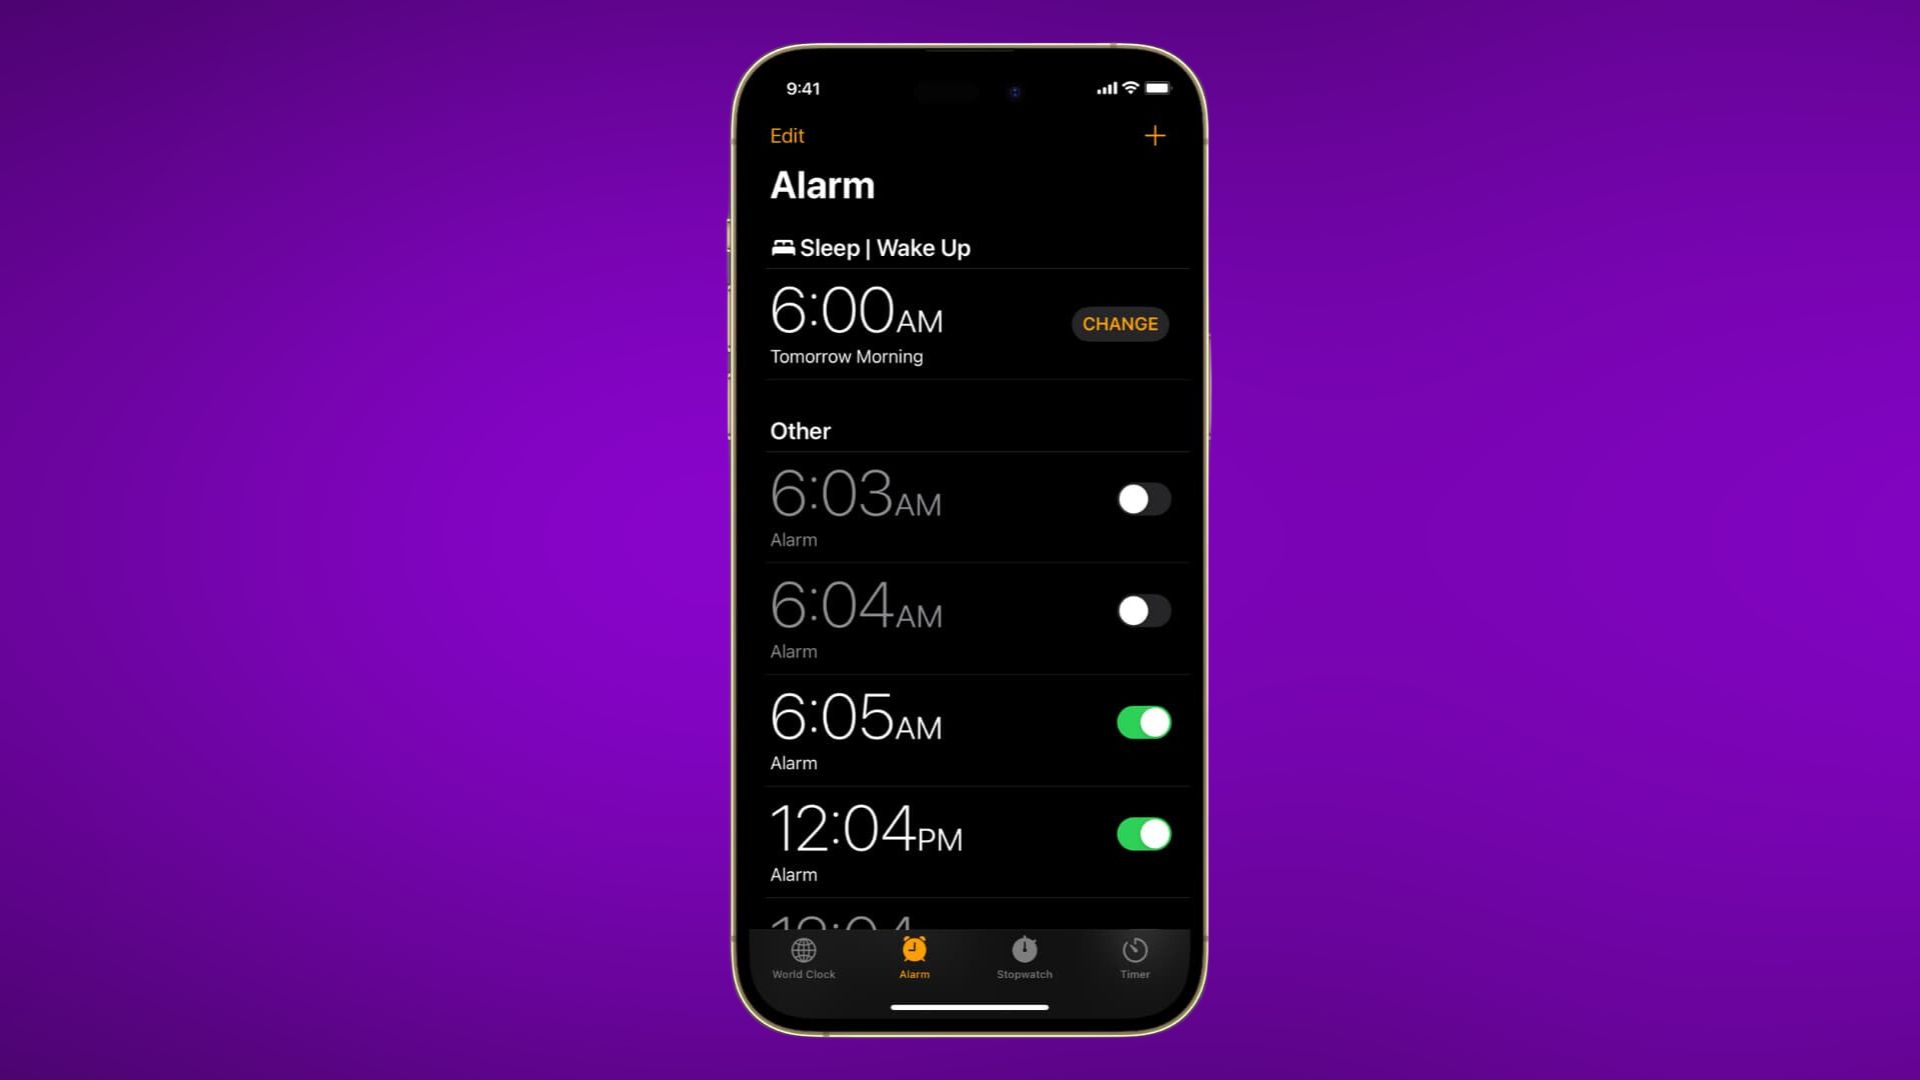 Why Your iPhone Alarm May Not Work Properly After an Update